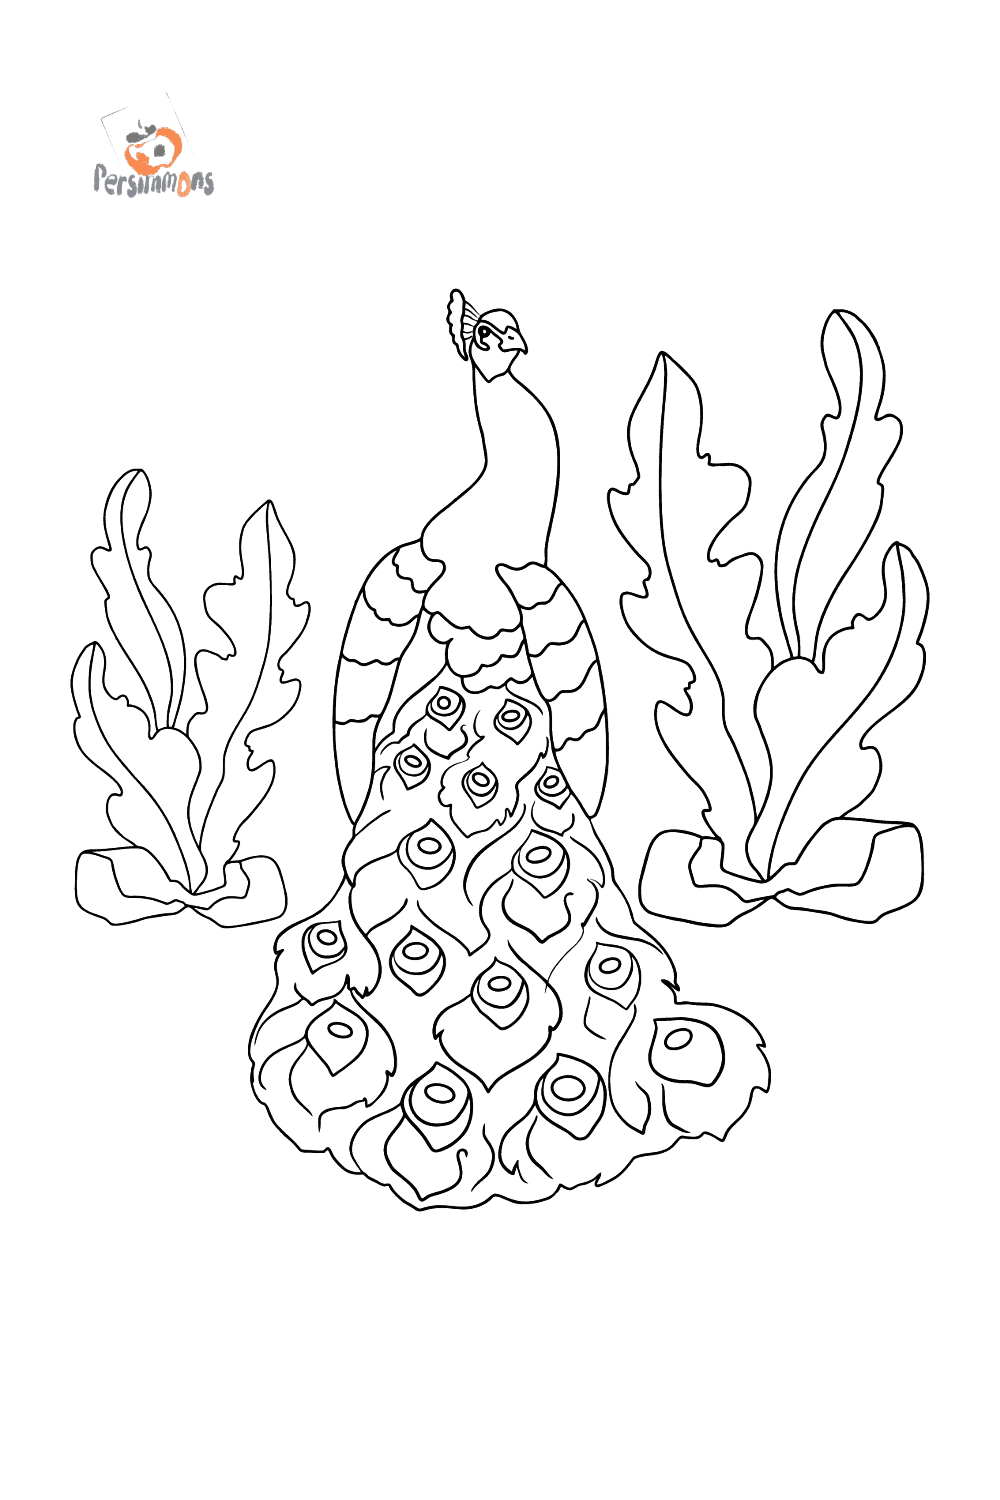 A Peacock Coloring Page Printable fo free